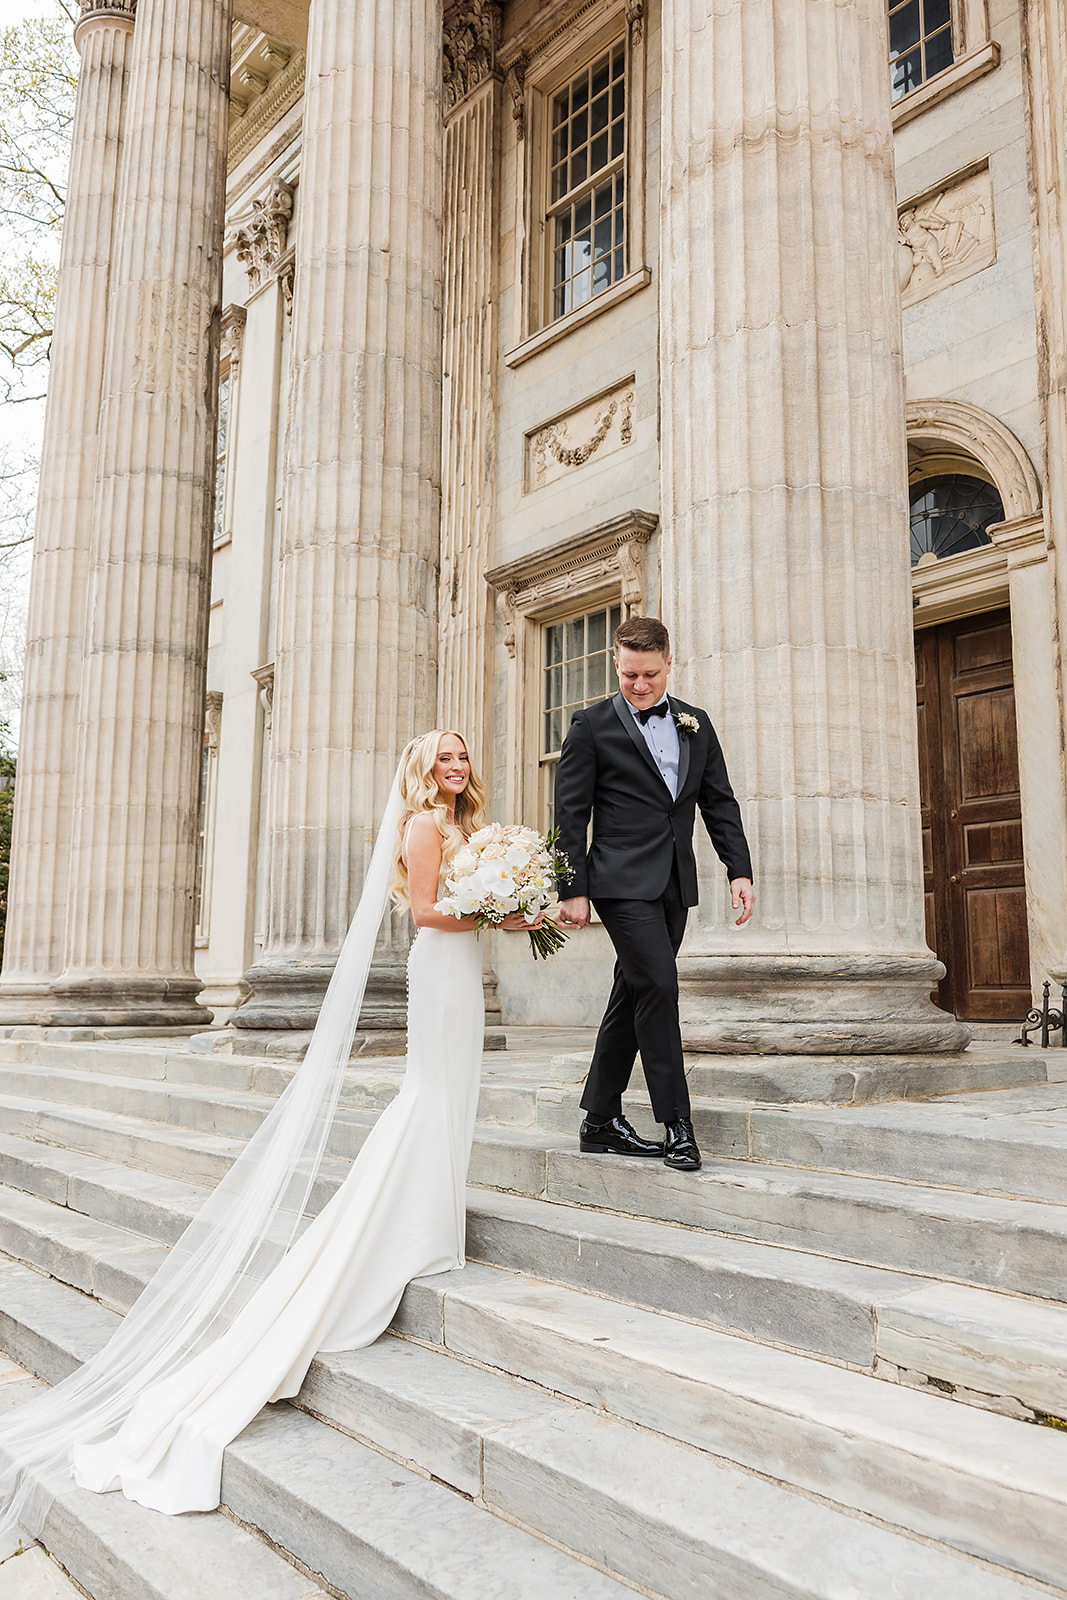 Stunning bride and groom on the steps of the First Bank in the Old City Philadelphia